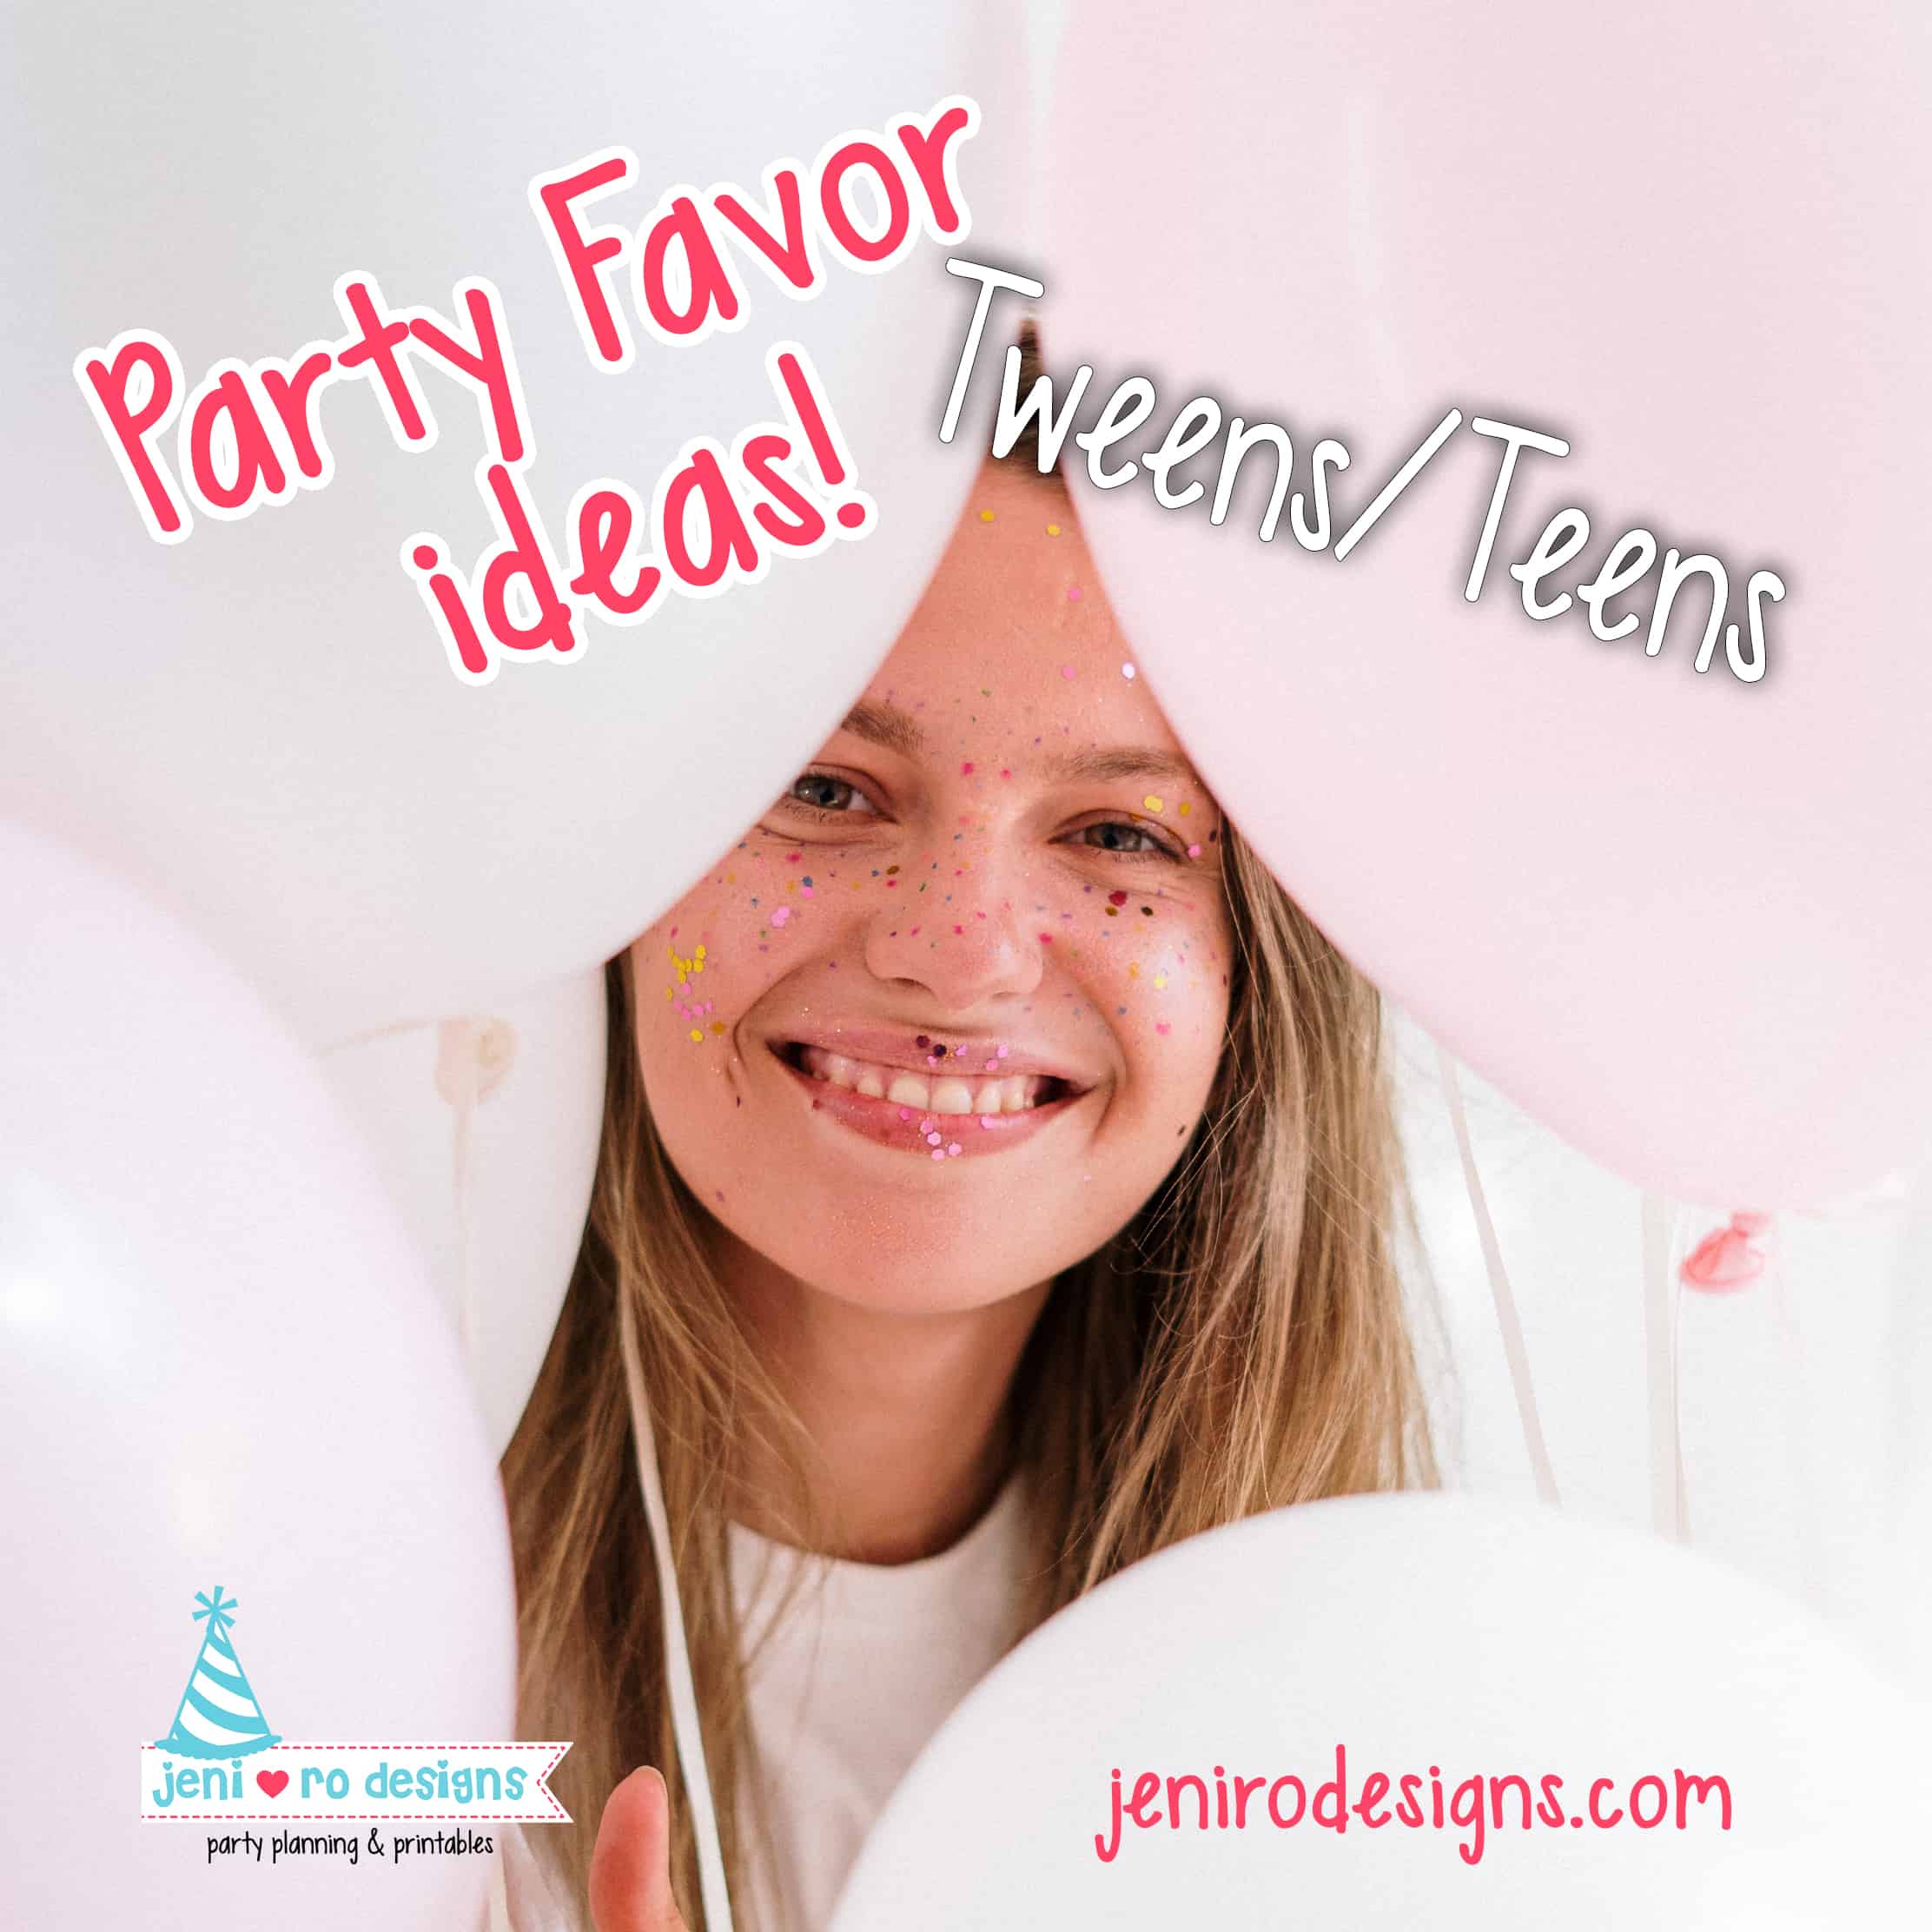 Party favor ideas for tweens and teens